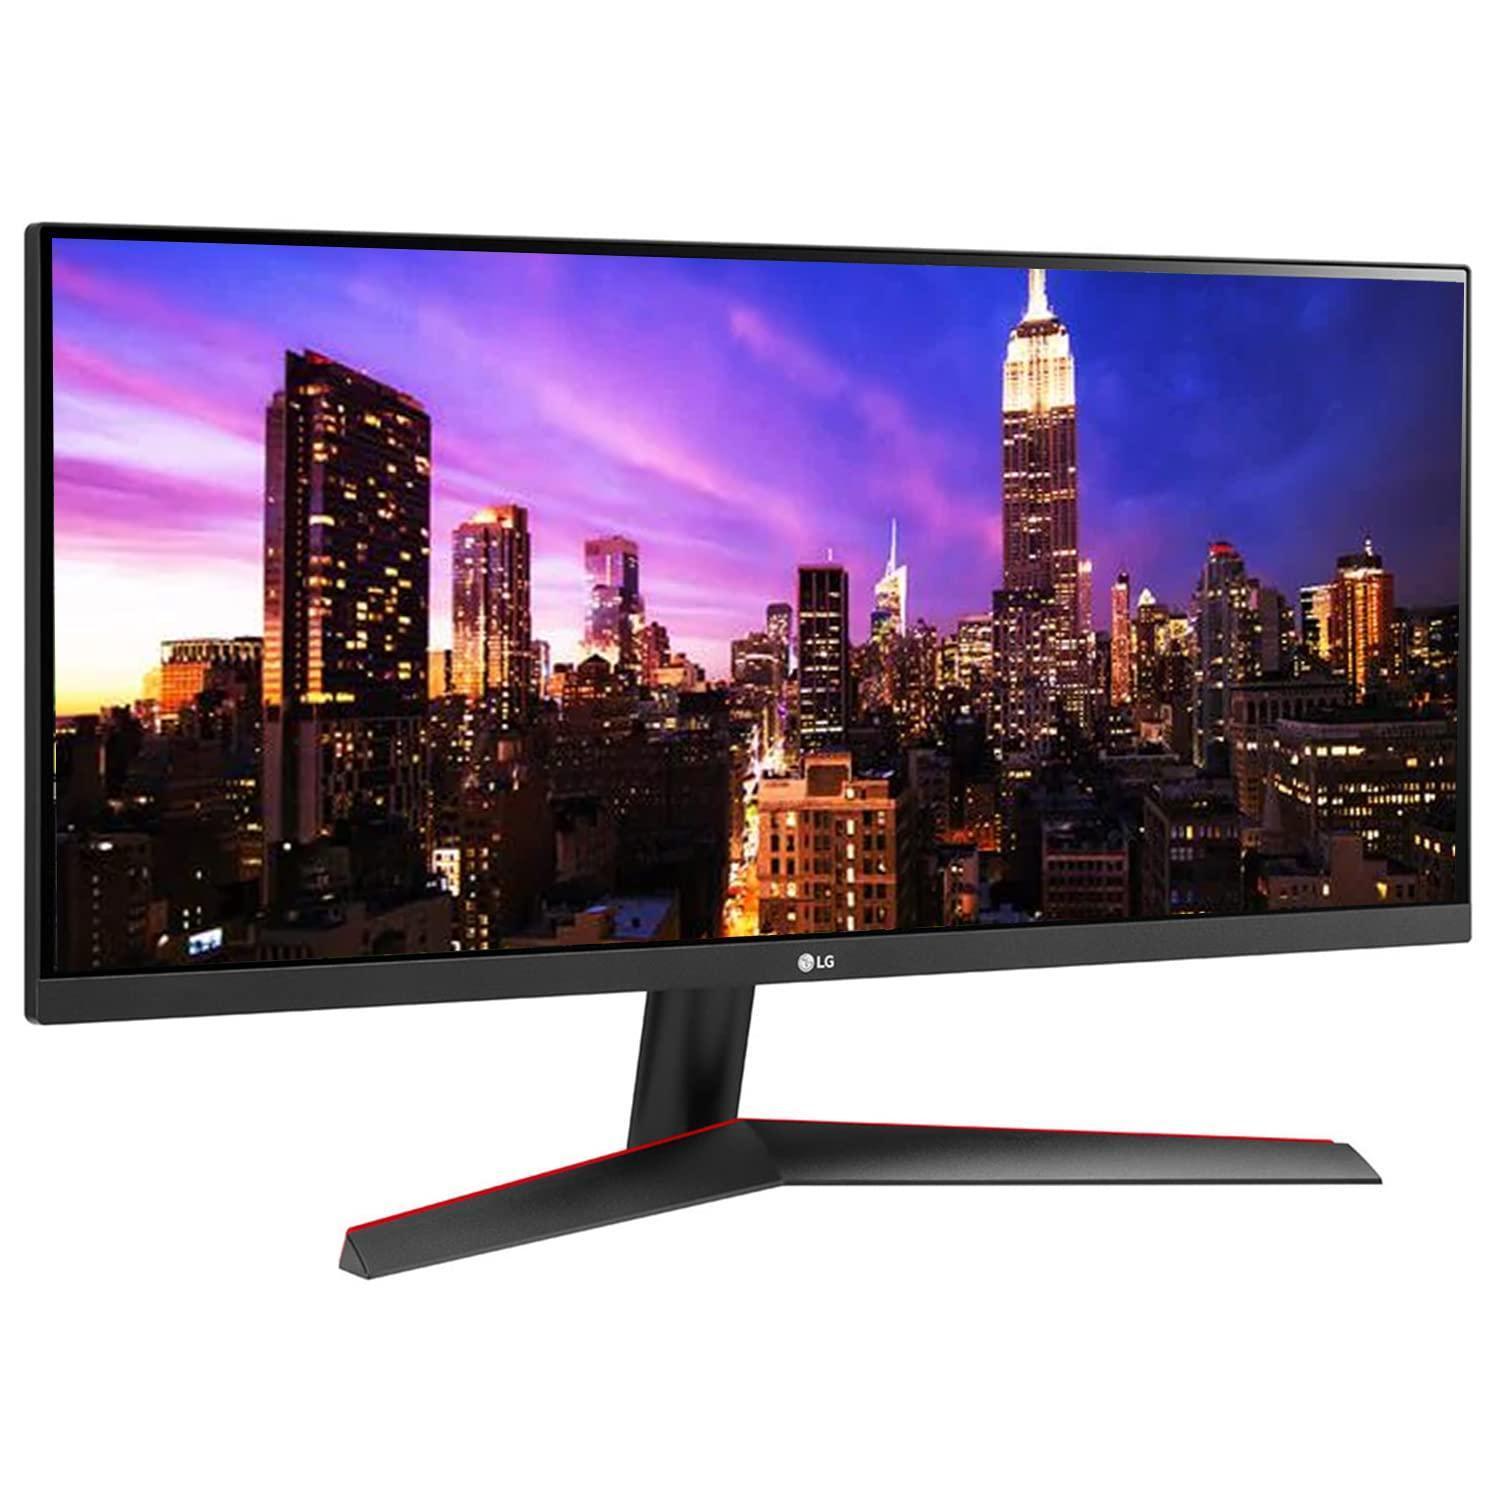 LG UltraWide 73 cm (29 Inches) WFHD (2560 x 1080) IPS Gaming Monitor with 1ms Response Rate, 75Hz Refresh Rate - 29WP60G, Black - Store For Gamers